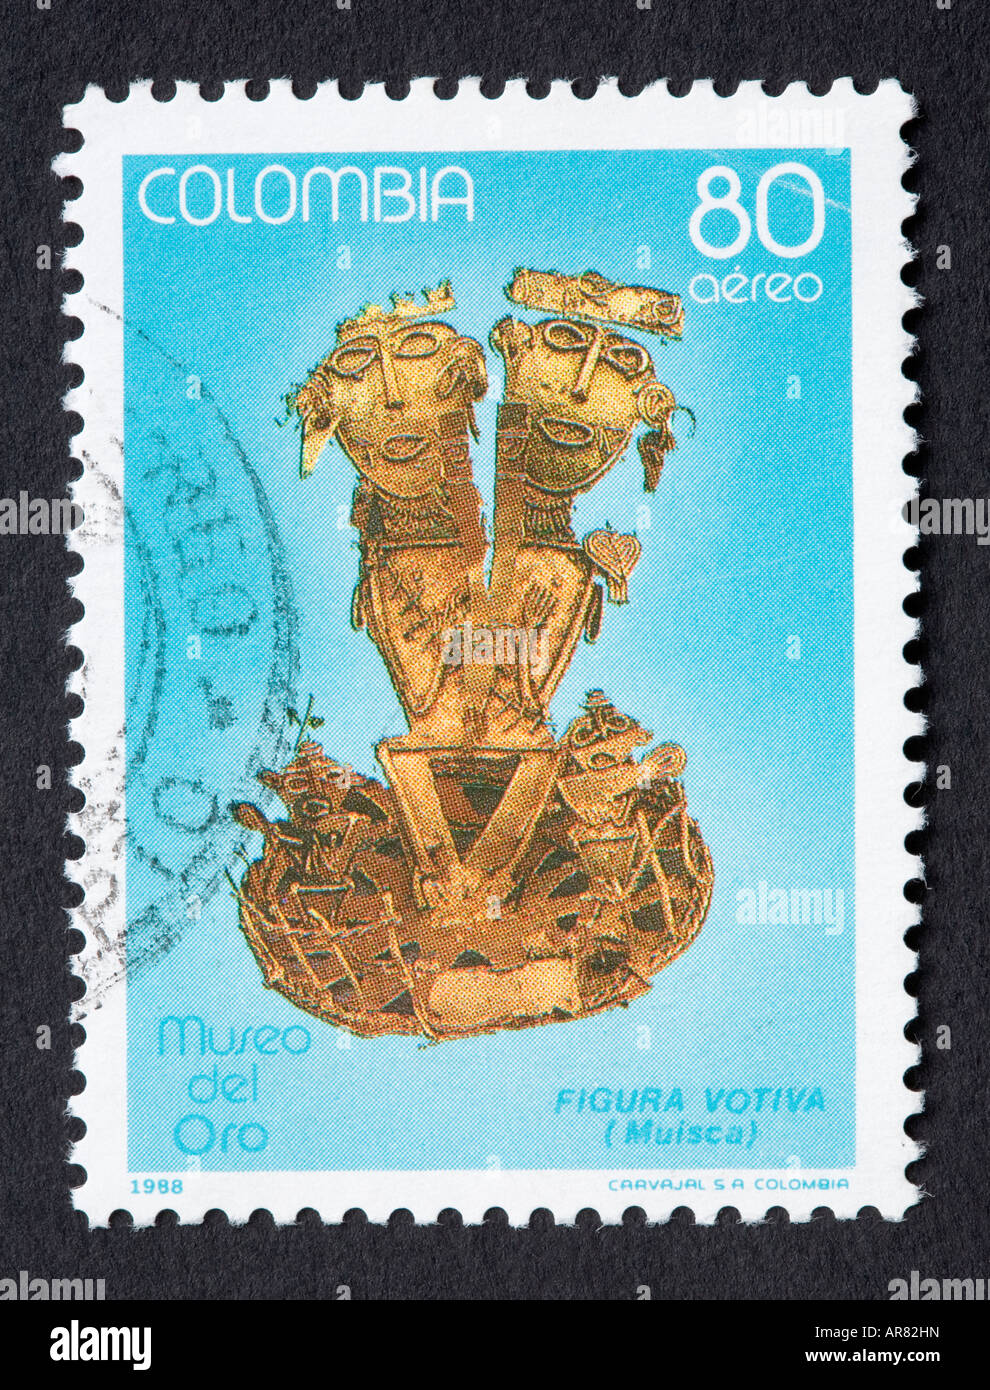 Colombian postage stamp Stock Photo